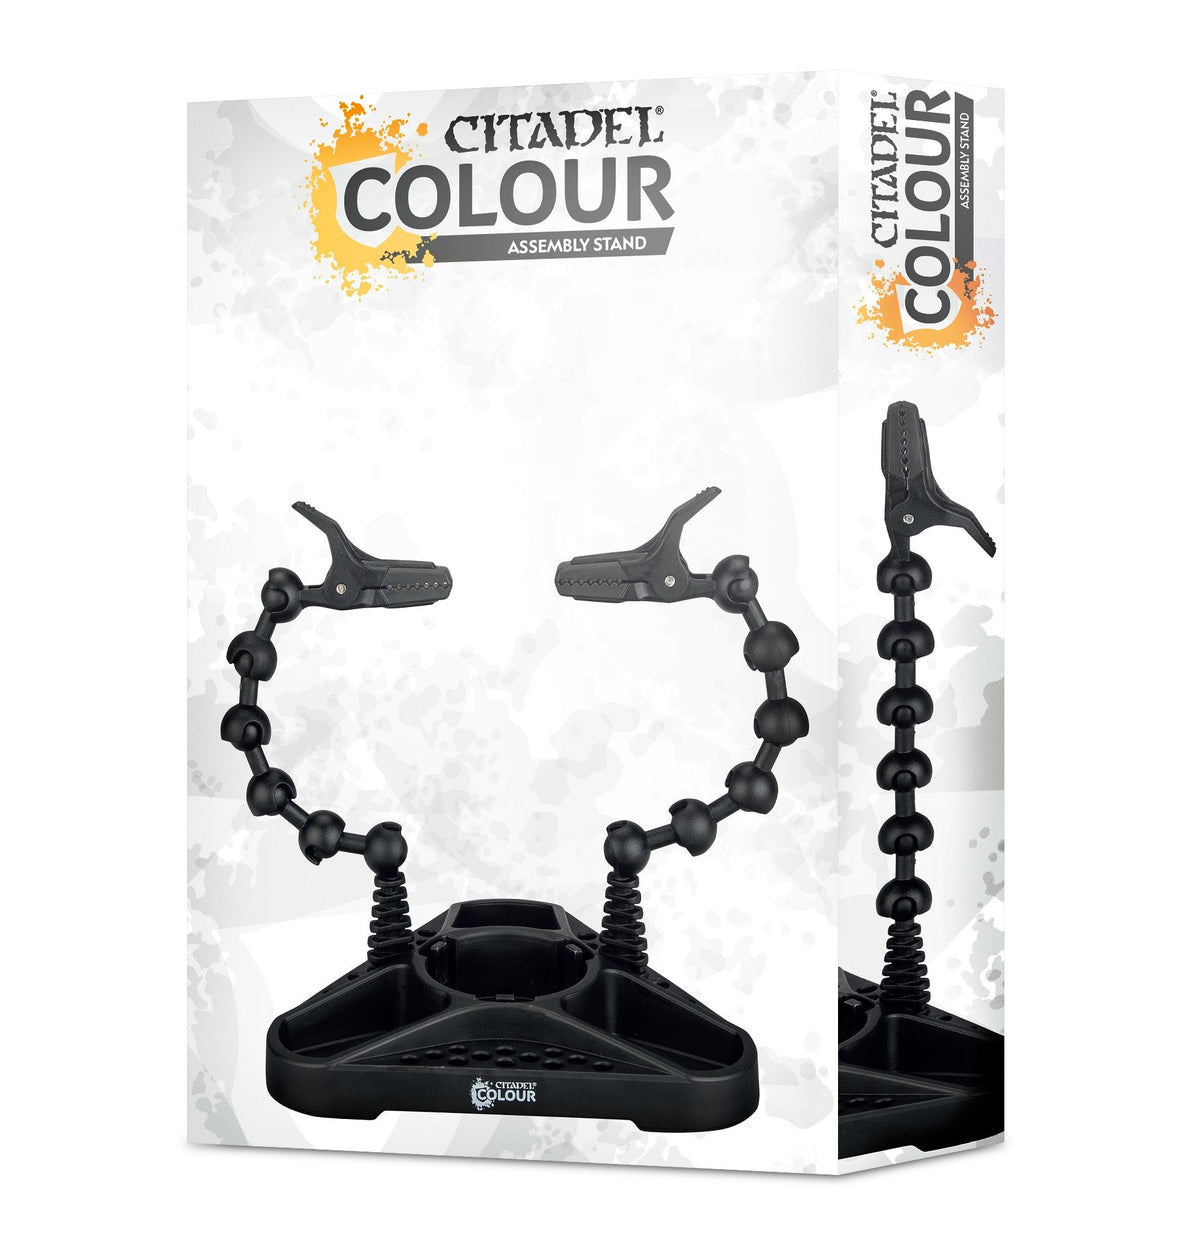 Assembly Stand (Citadel Colour)